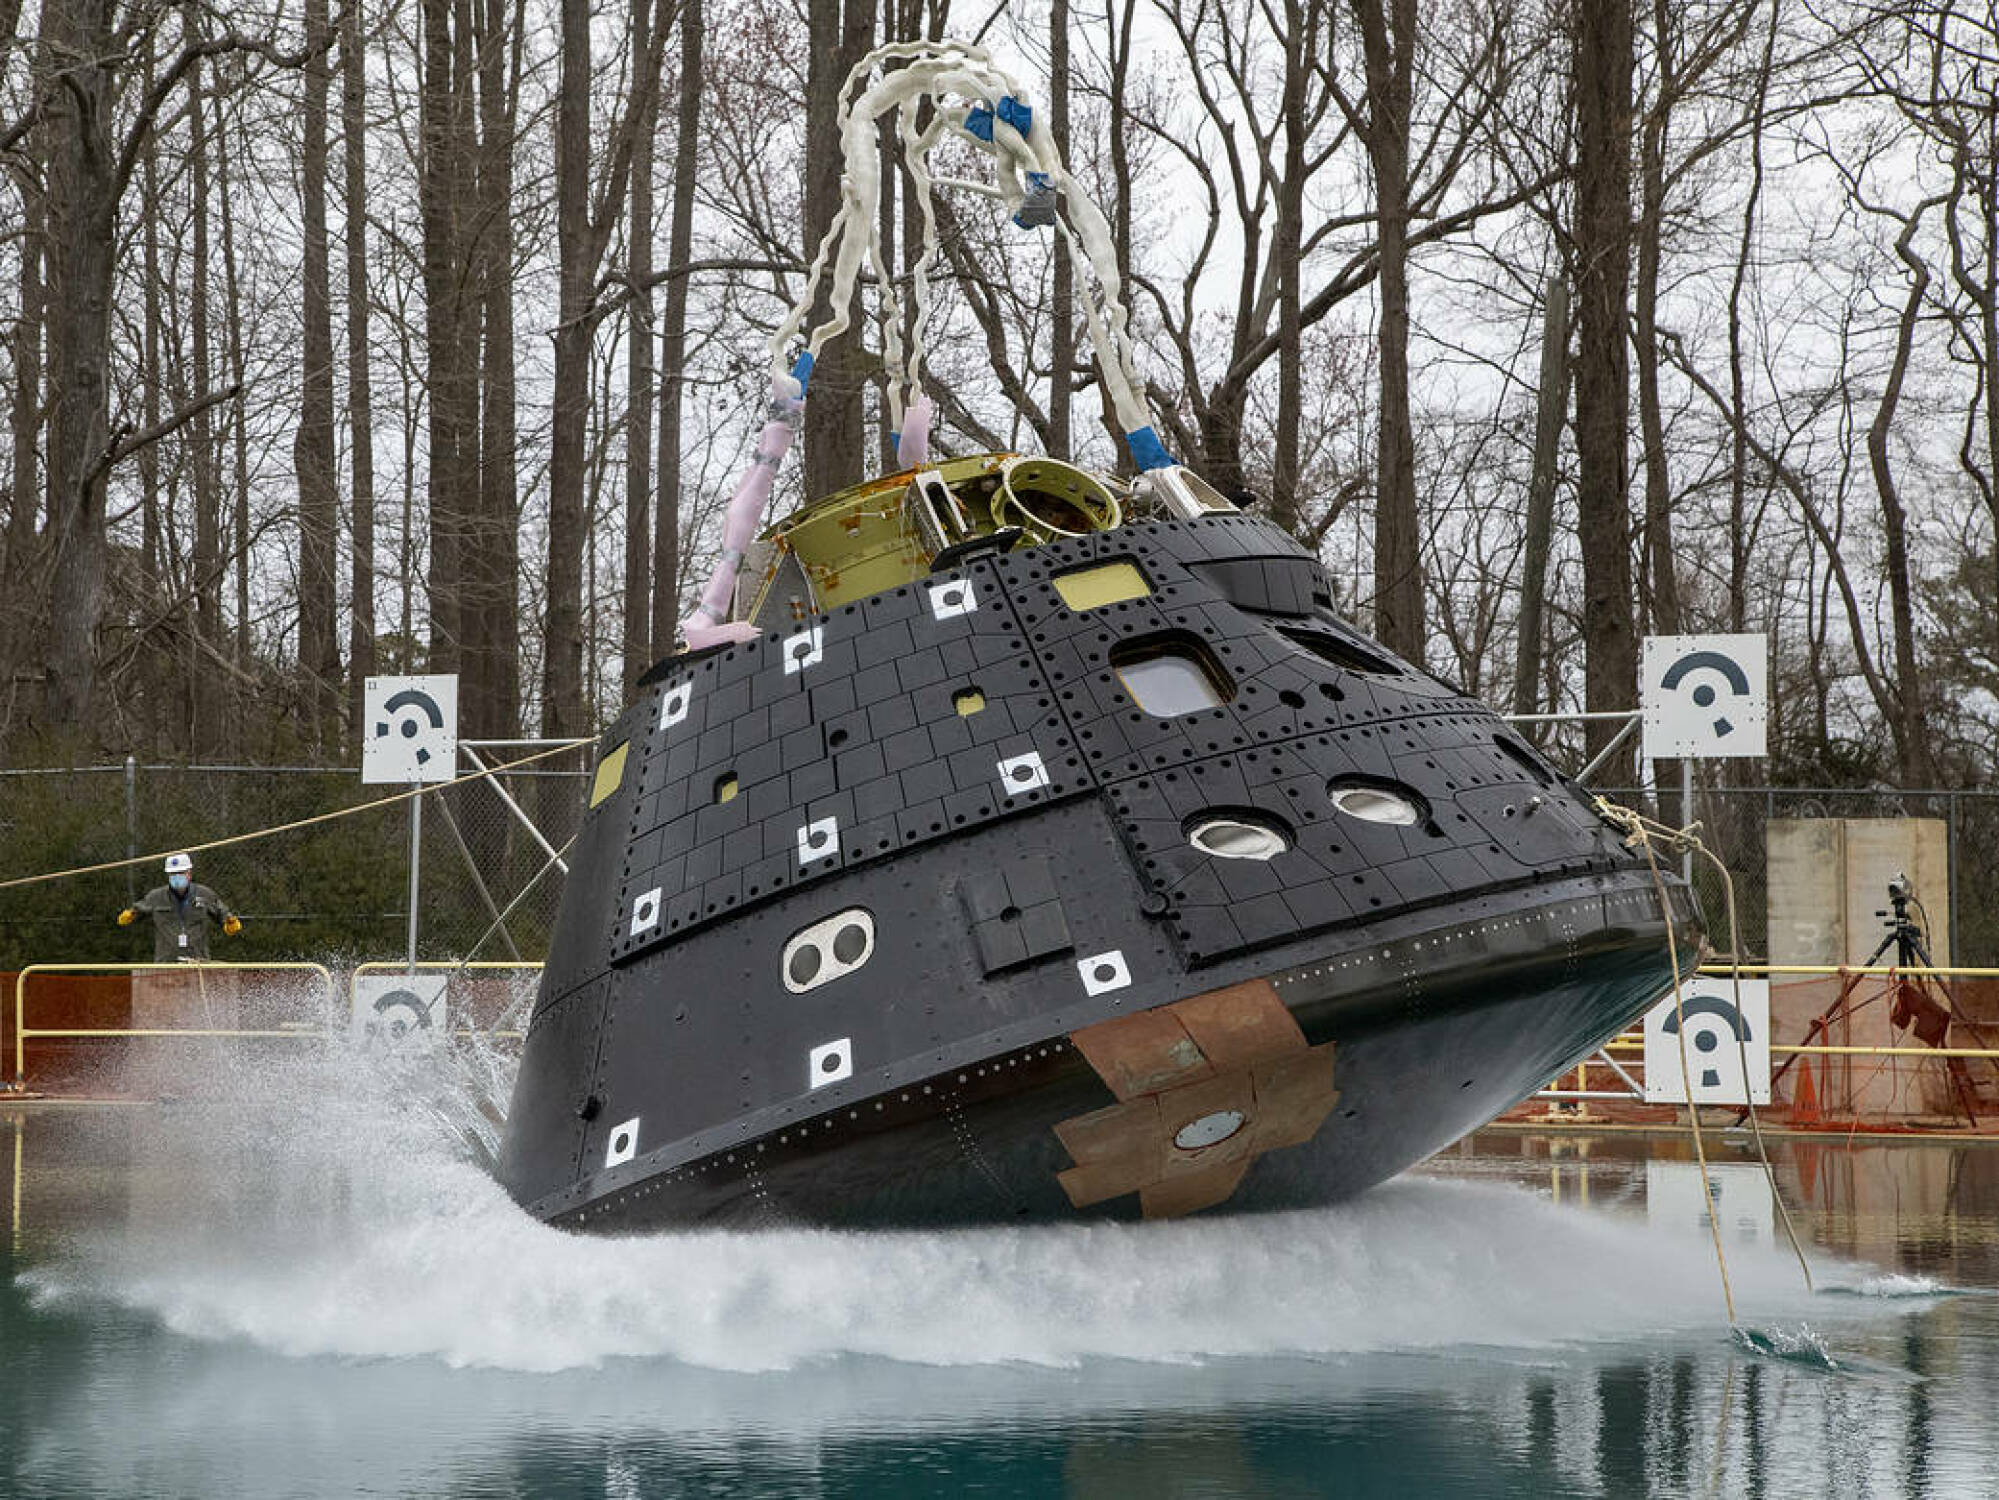 NASA testing the Orion spacecraft landing in a pool